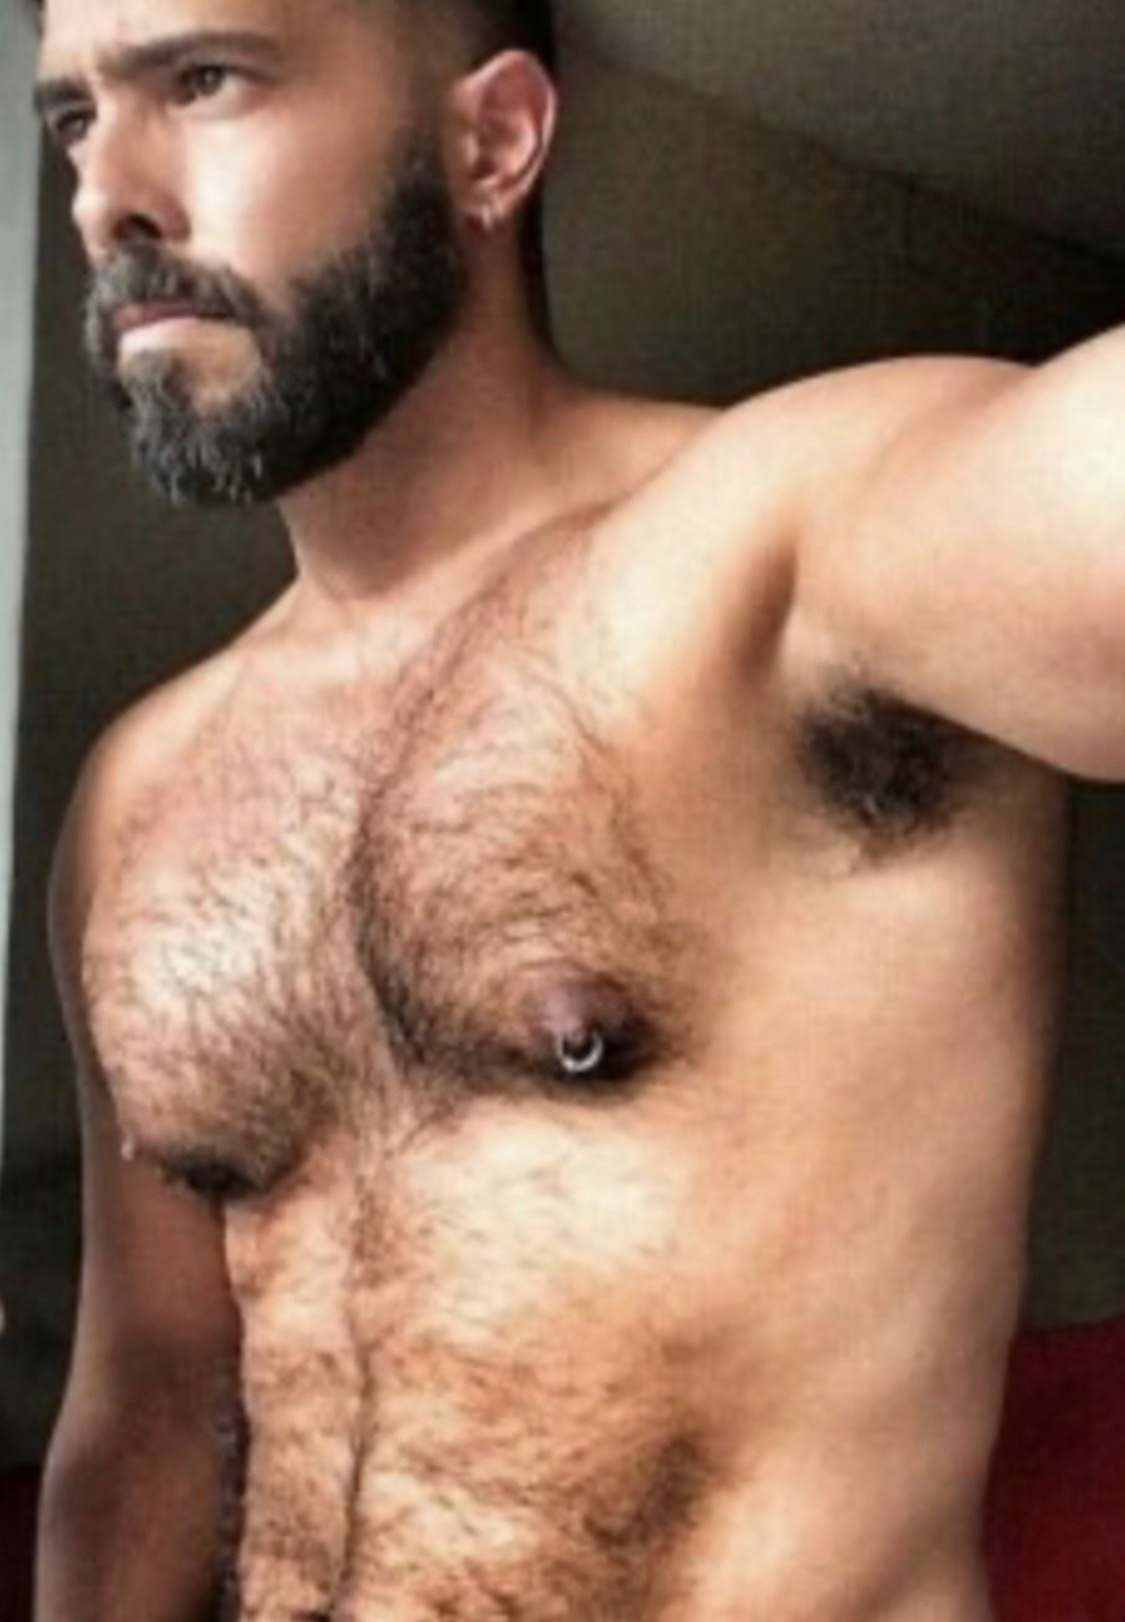 Photo by Smitty with the username @Resol702,  February 17, 2020 at 6:51 AM. The post is about the topic Gay Hairy Men